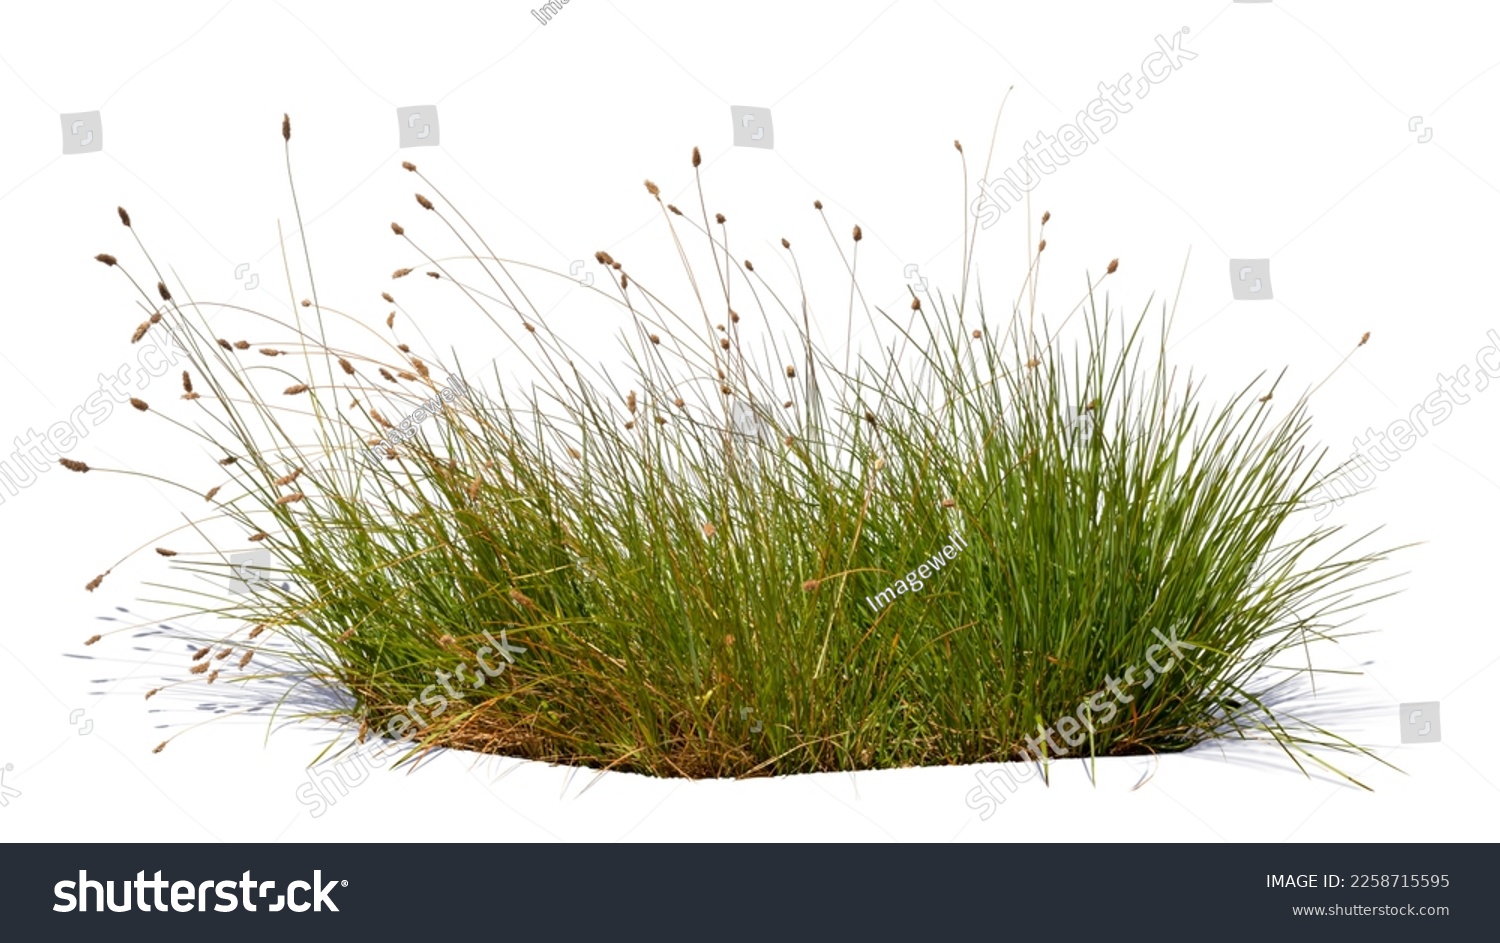 Bush of blooming ornamental grass isolated on white background #2258715595